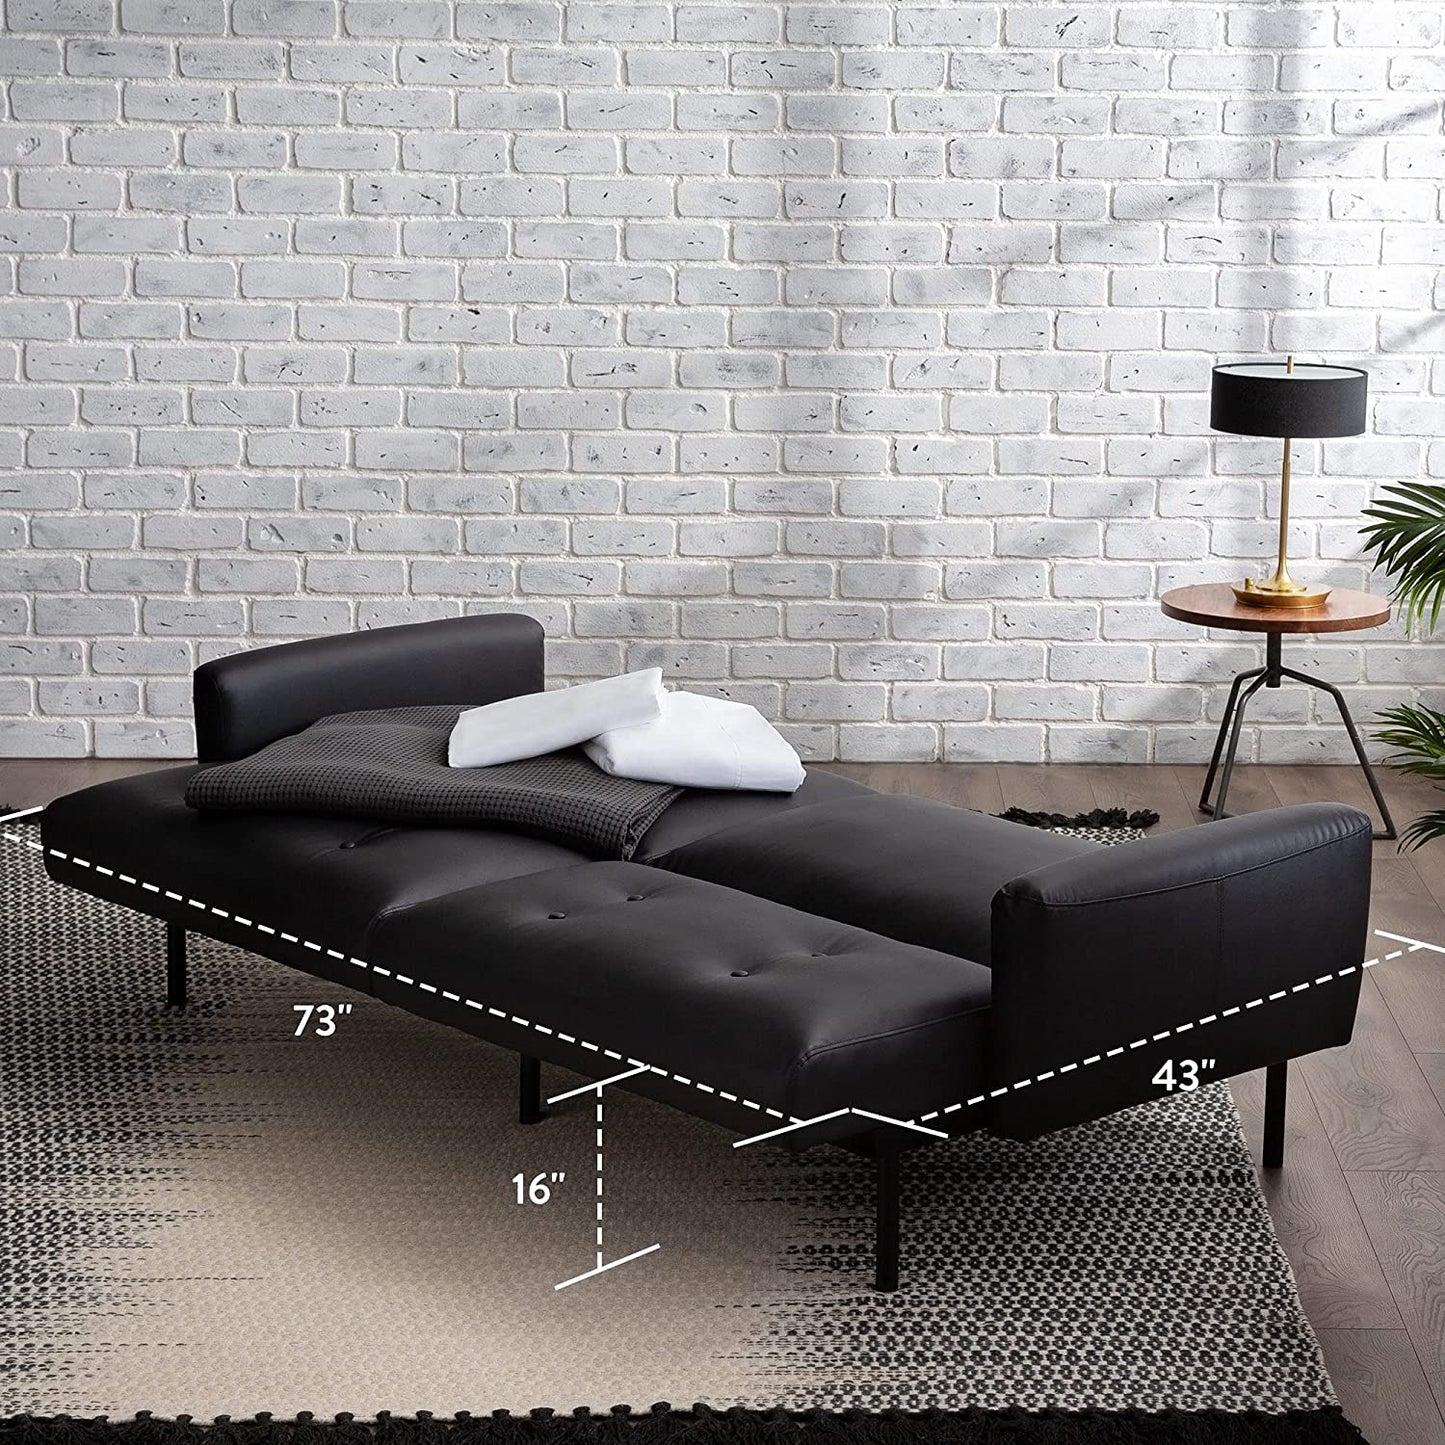 SOFA CUM BED Modern Square Arm Design-Compact Couch Bed, Deluxe 